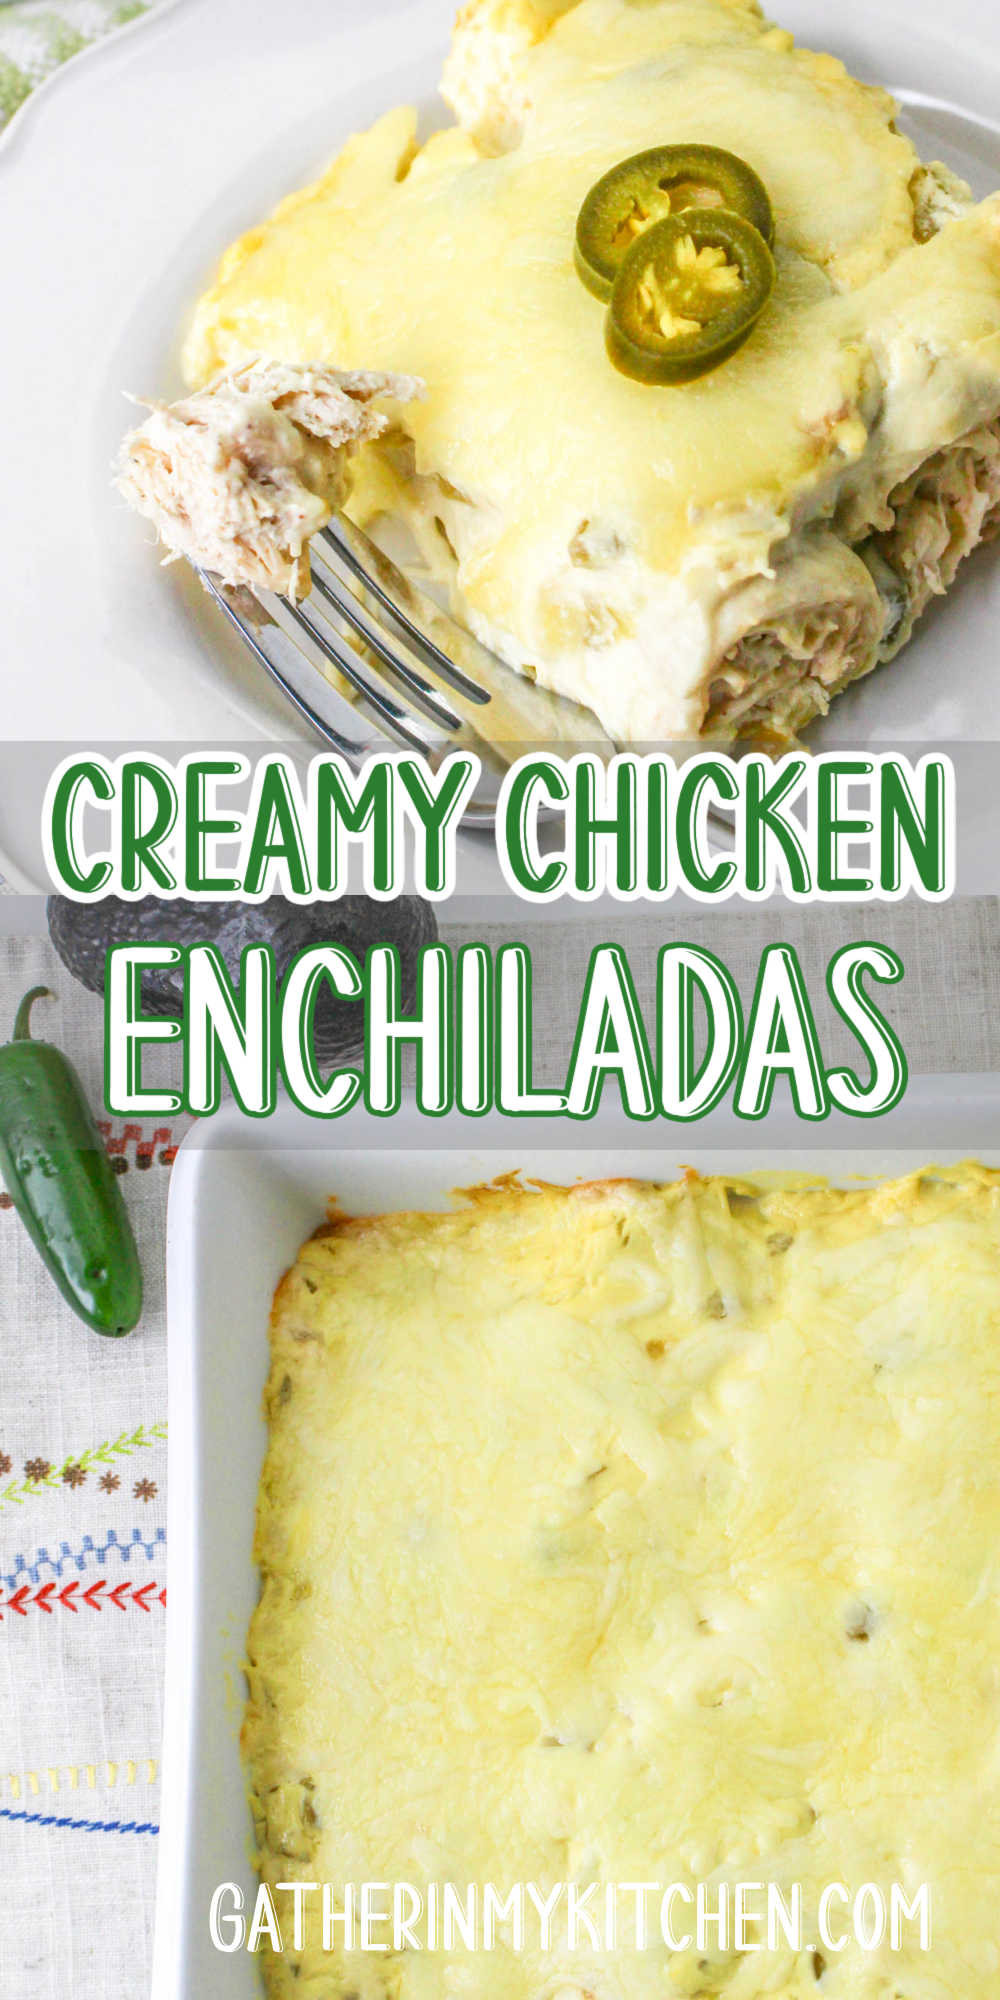 pin image: top is a top view of a slice of creamy chicken enchilada, middle says "Creamy Chicken Enchiladas" and bottom is a tray of chicken enchiladas